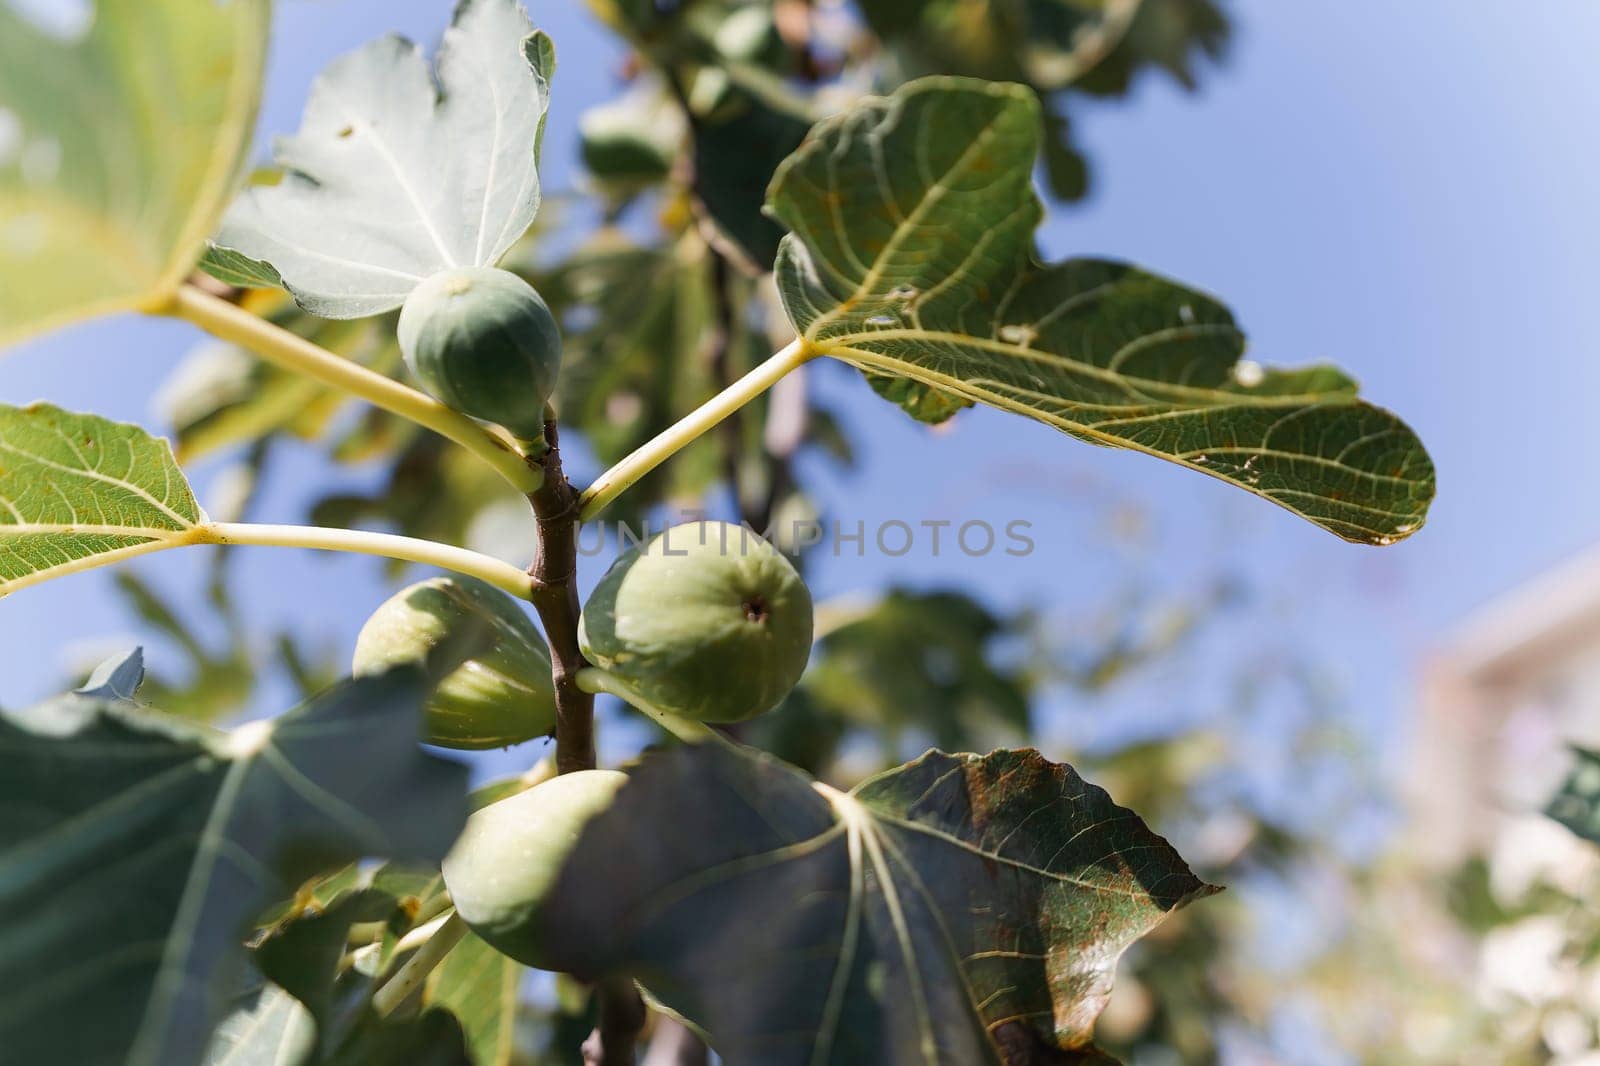 Figs with green leaves and small green fruits. The fruits are collected together on the branches. The sky is clear and blue. by Matiunina